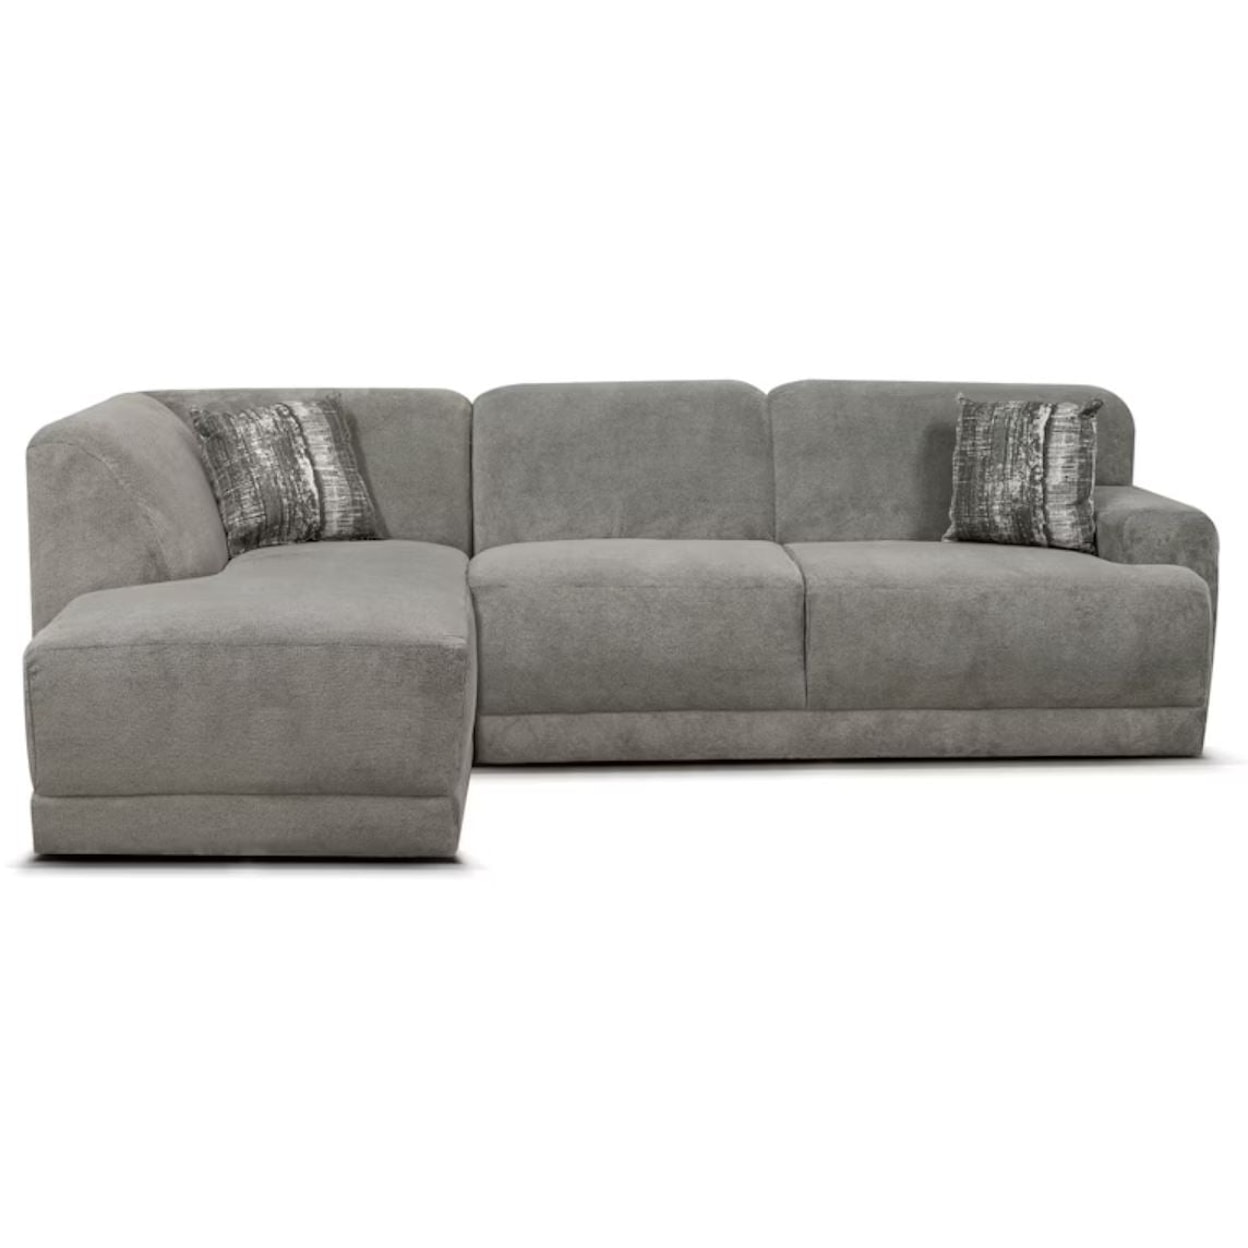 England Phoenix Sectional with Chaise